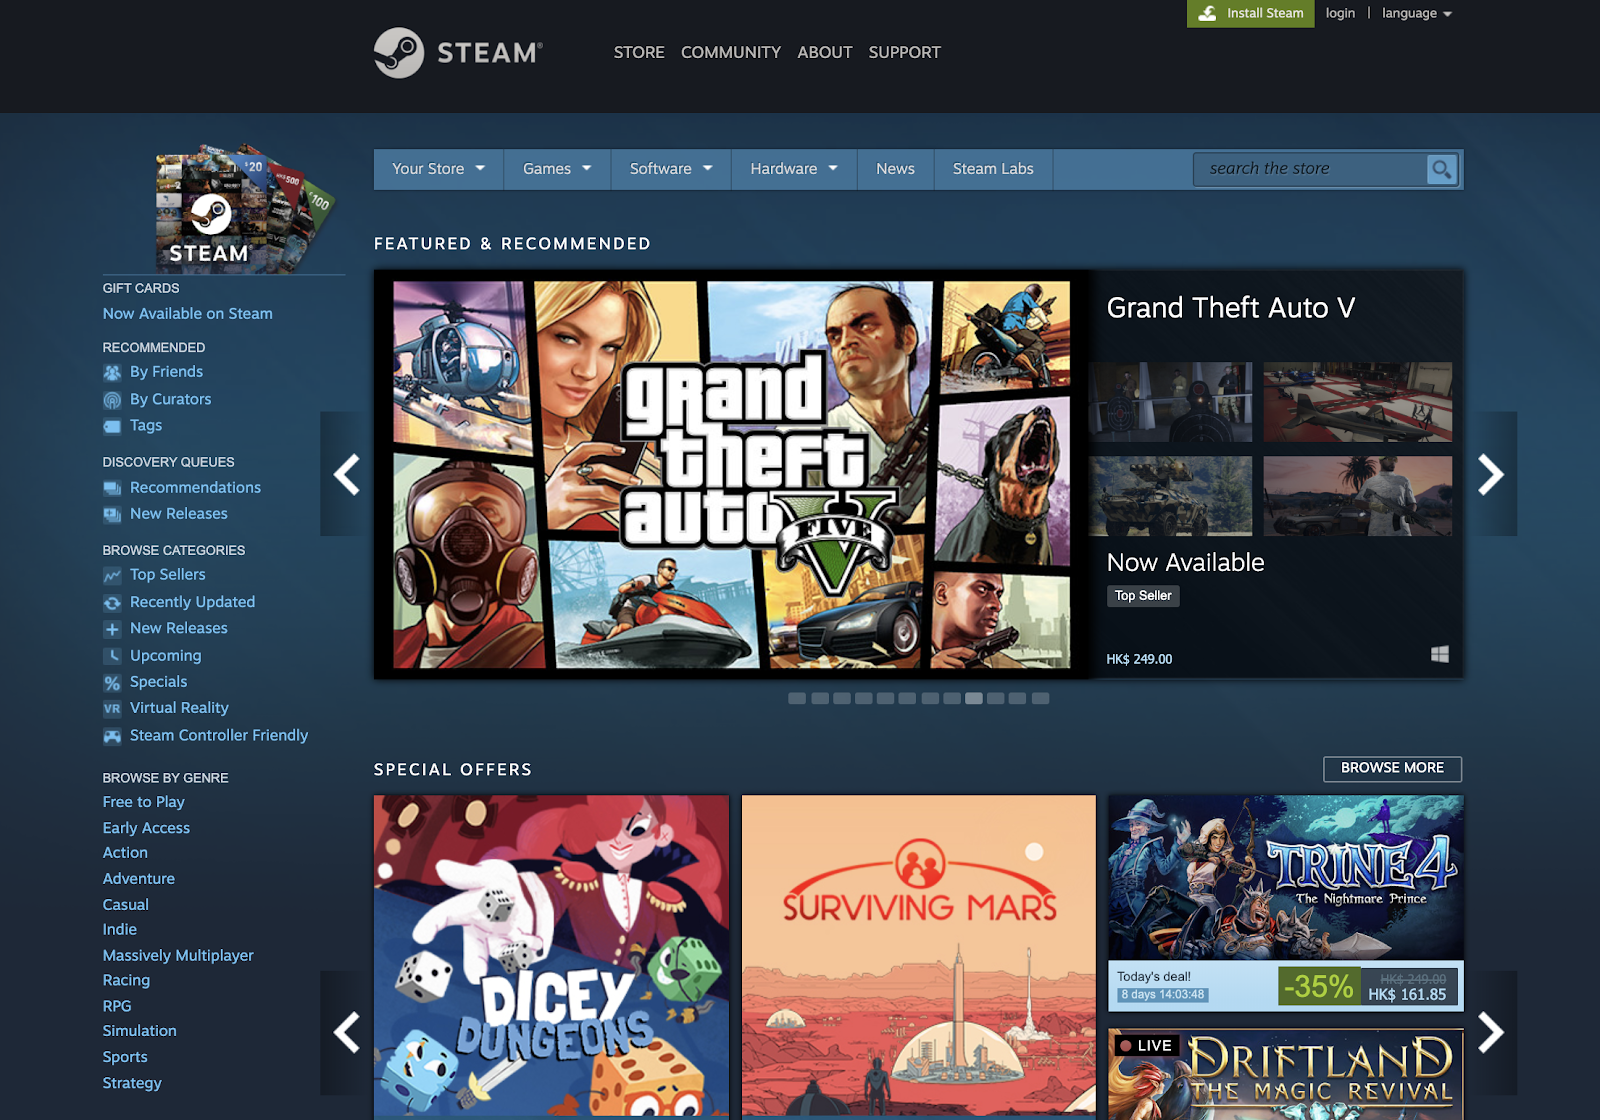 Steam is a popular platform for gamers in China. (Picture: Steam/Valve)